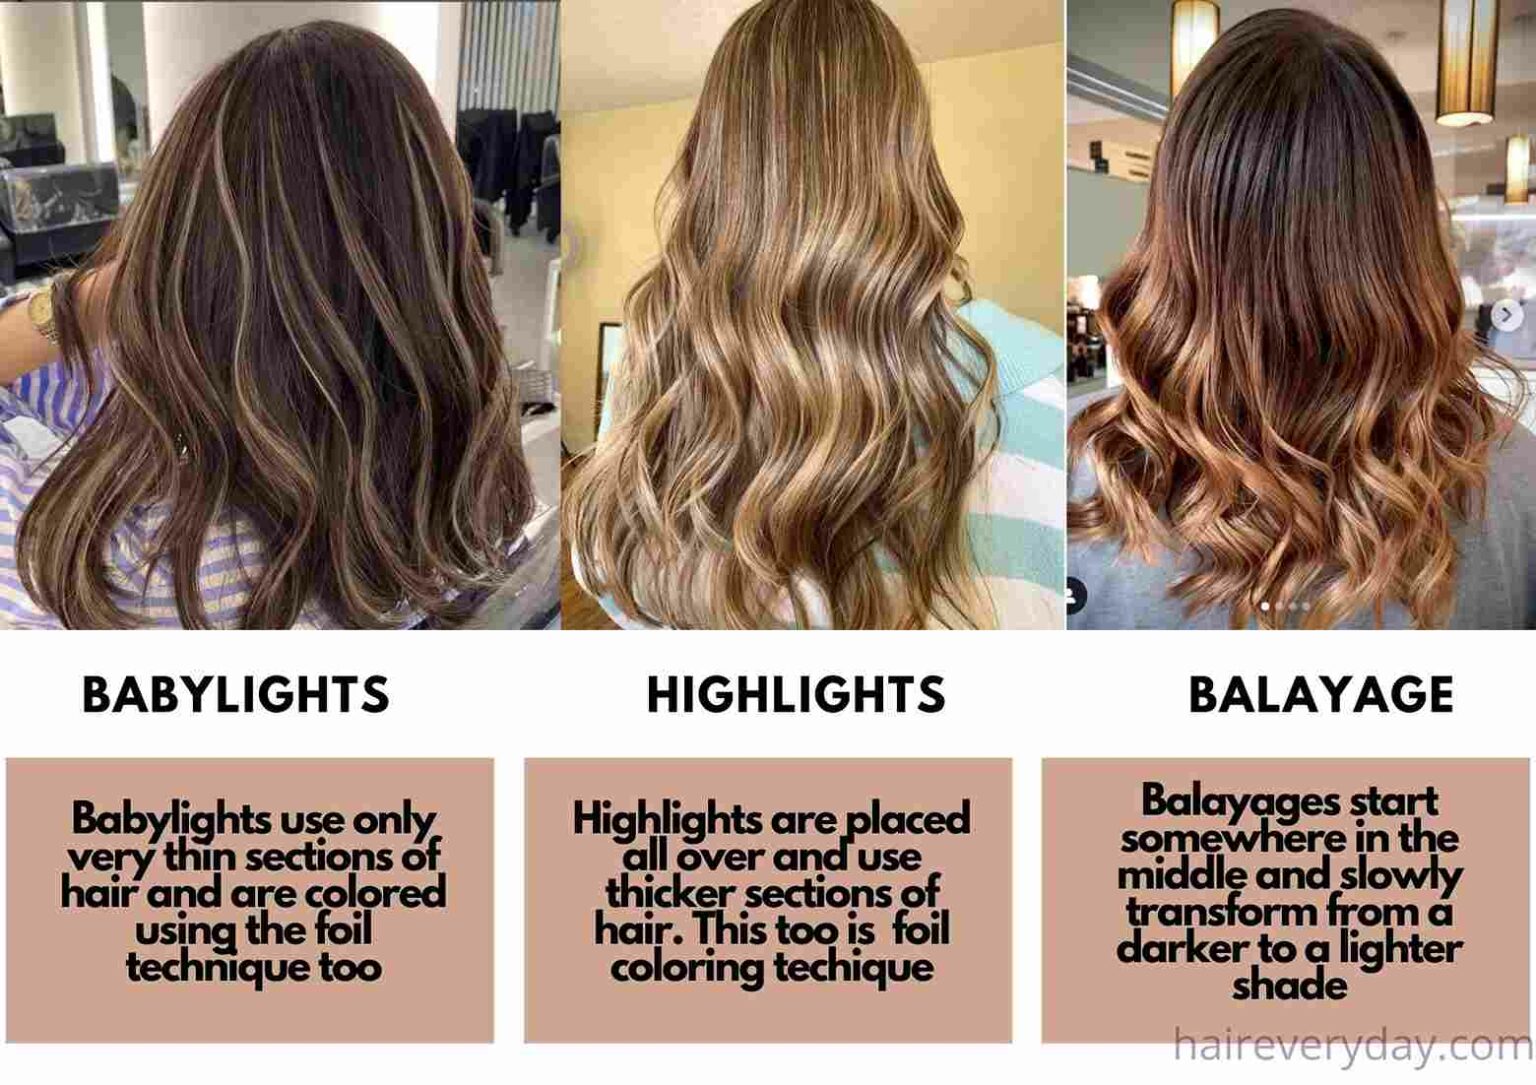 1. "Brown Hair with Blonde Balayage: 21 Stunning Examples" 
2. "How to Get the Perfect Brown to Blonde Balayage" 
3. "Brown Hair with Blonde Balayage: The Ultimate Guide" 
4. "20 Beautiful Brown to Blonde Balayage Hairstyles" 
5. "Brown Hair with Blonde Balayage: Before and After Photos" 
6. "The Best Brown to Blonde Balayage Color Ideas" 
7. "Brown Hair with Blonde Balayage: Maintenance and Care Tips" 
8. "Celebrities with Brown Hair and Blonde Balayage" 
9. "Brown Hair with Blonde Balayage: DIY Tutorial" 
10. "The Difference Between Balayage and Ombre for Brown Hair with Blonde Highlights" - wide 4